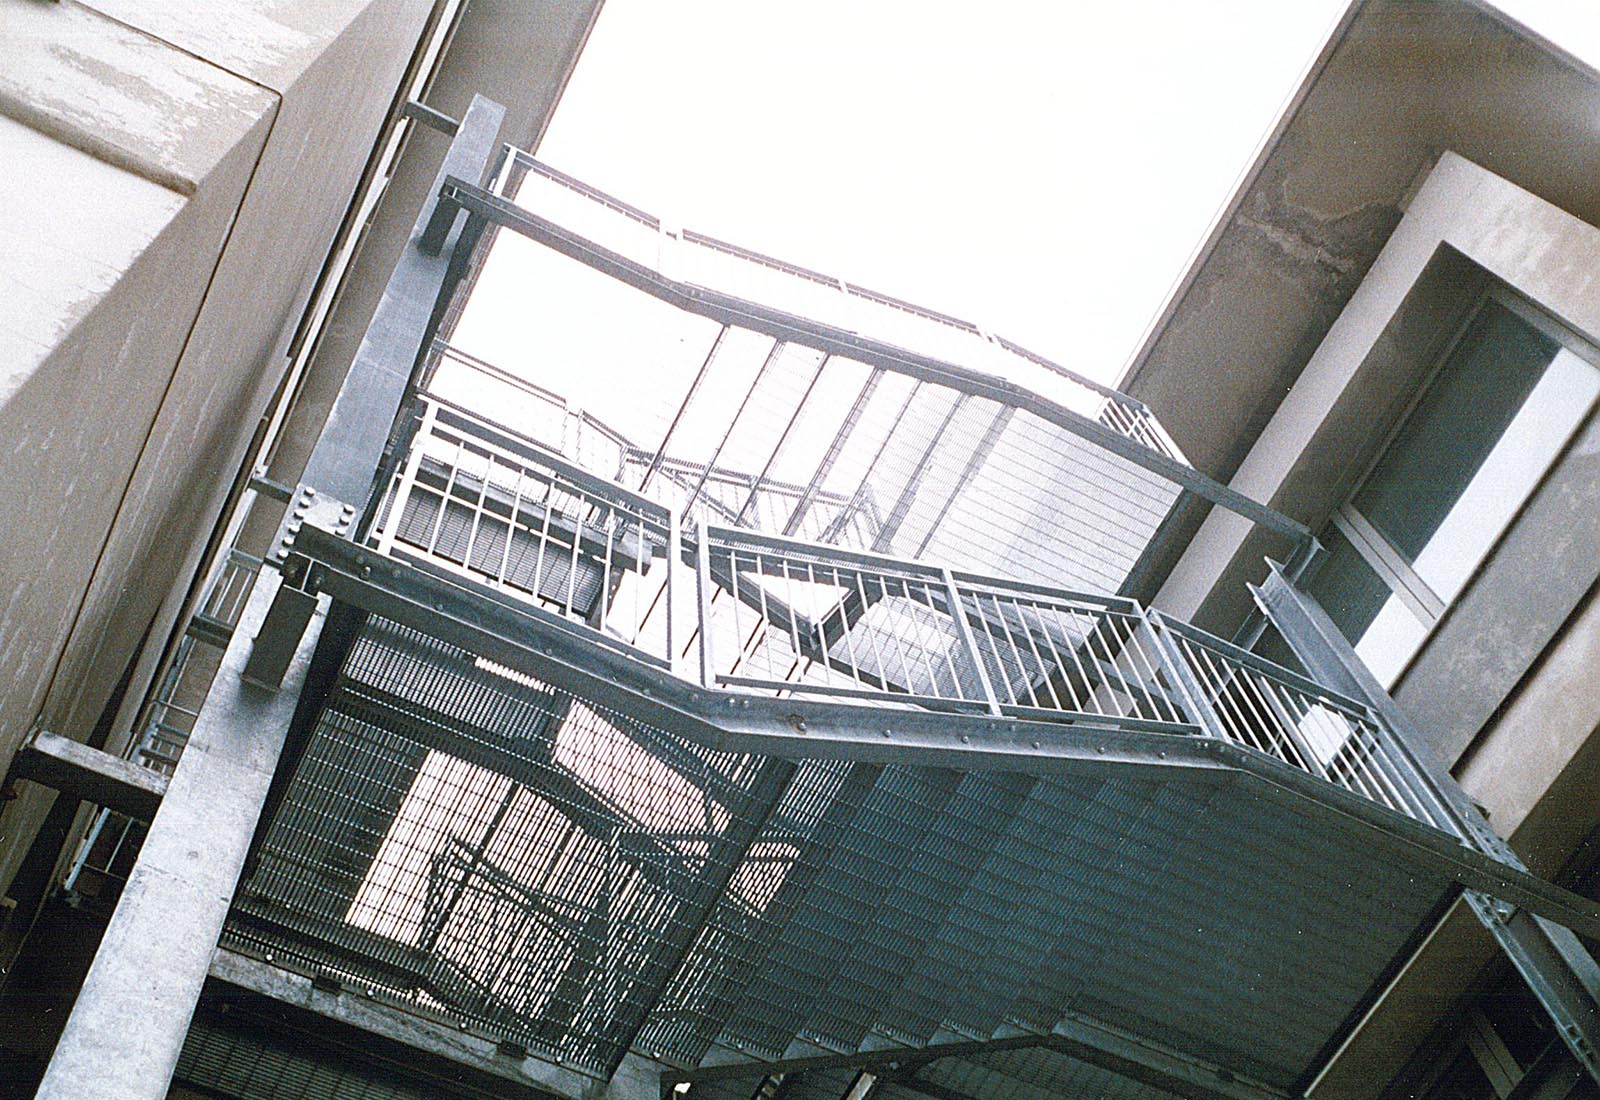 High school renovation in Como - The new emergency staircase